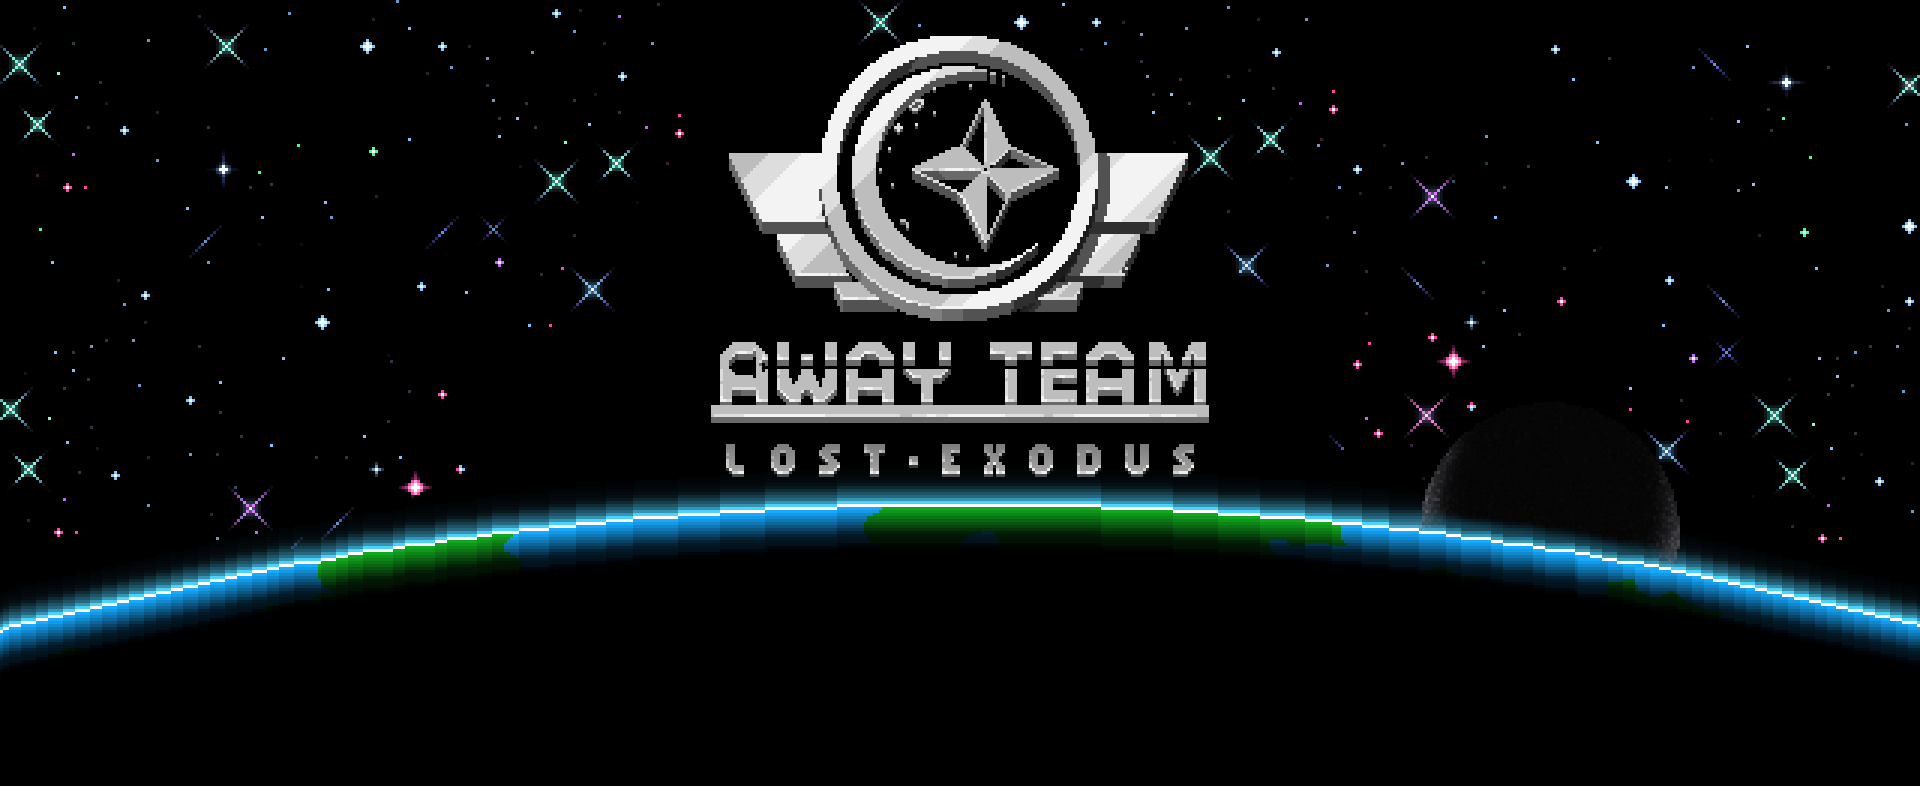 The Away Team: Lost Exodus, coming October 22nd